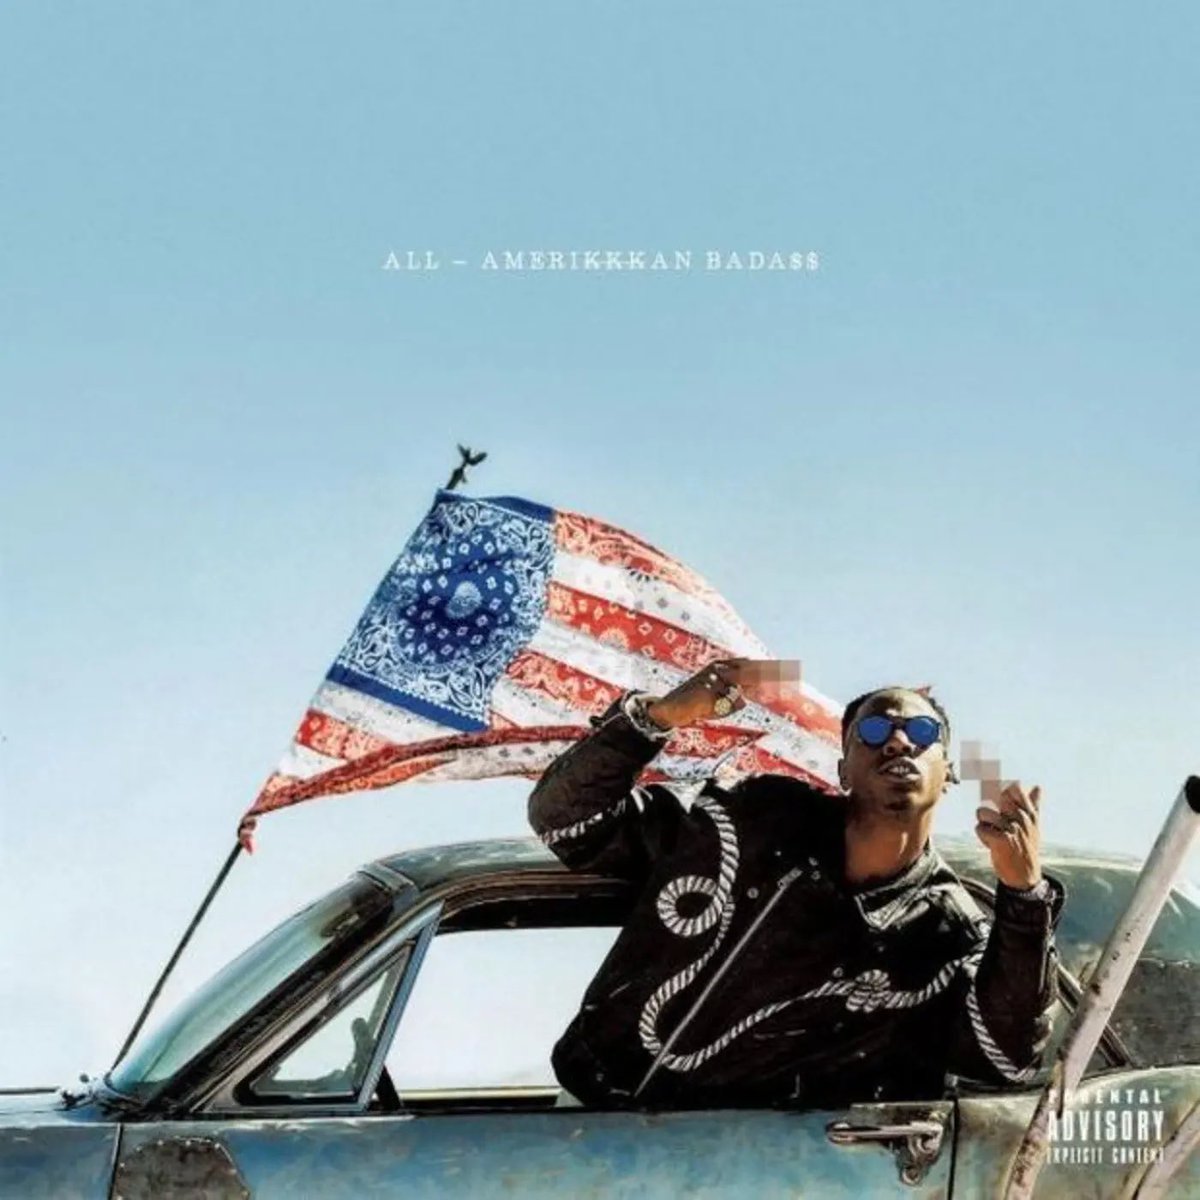 April 7, 2017 @joeyBADASS released
All-Amerikkkan Badass

Some Production Includes @StatikSelekt @KirkKnight @DJKhalil @Chuck_Strangers @dial_1900 and more 

Some Features Include @ScHoolboyQ @NyckCaution @JColeNC @ChronixxMusic @stylesp and more